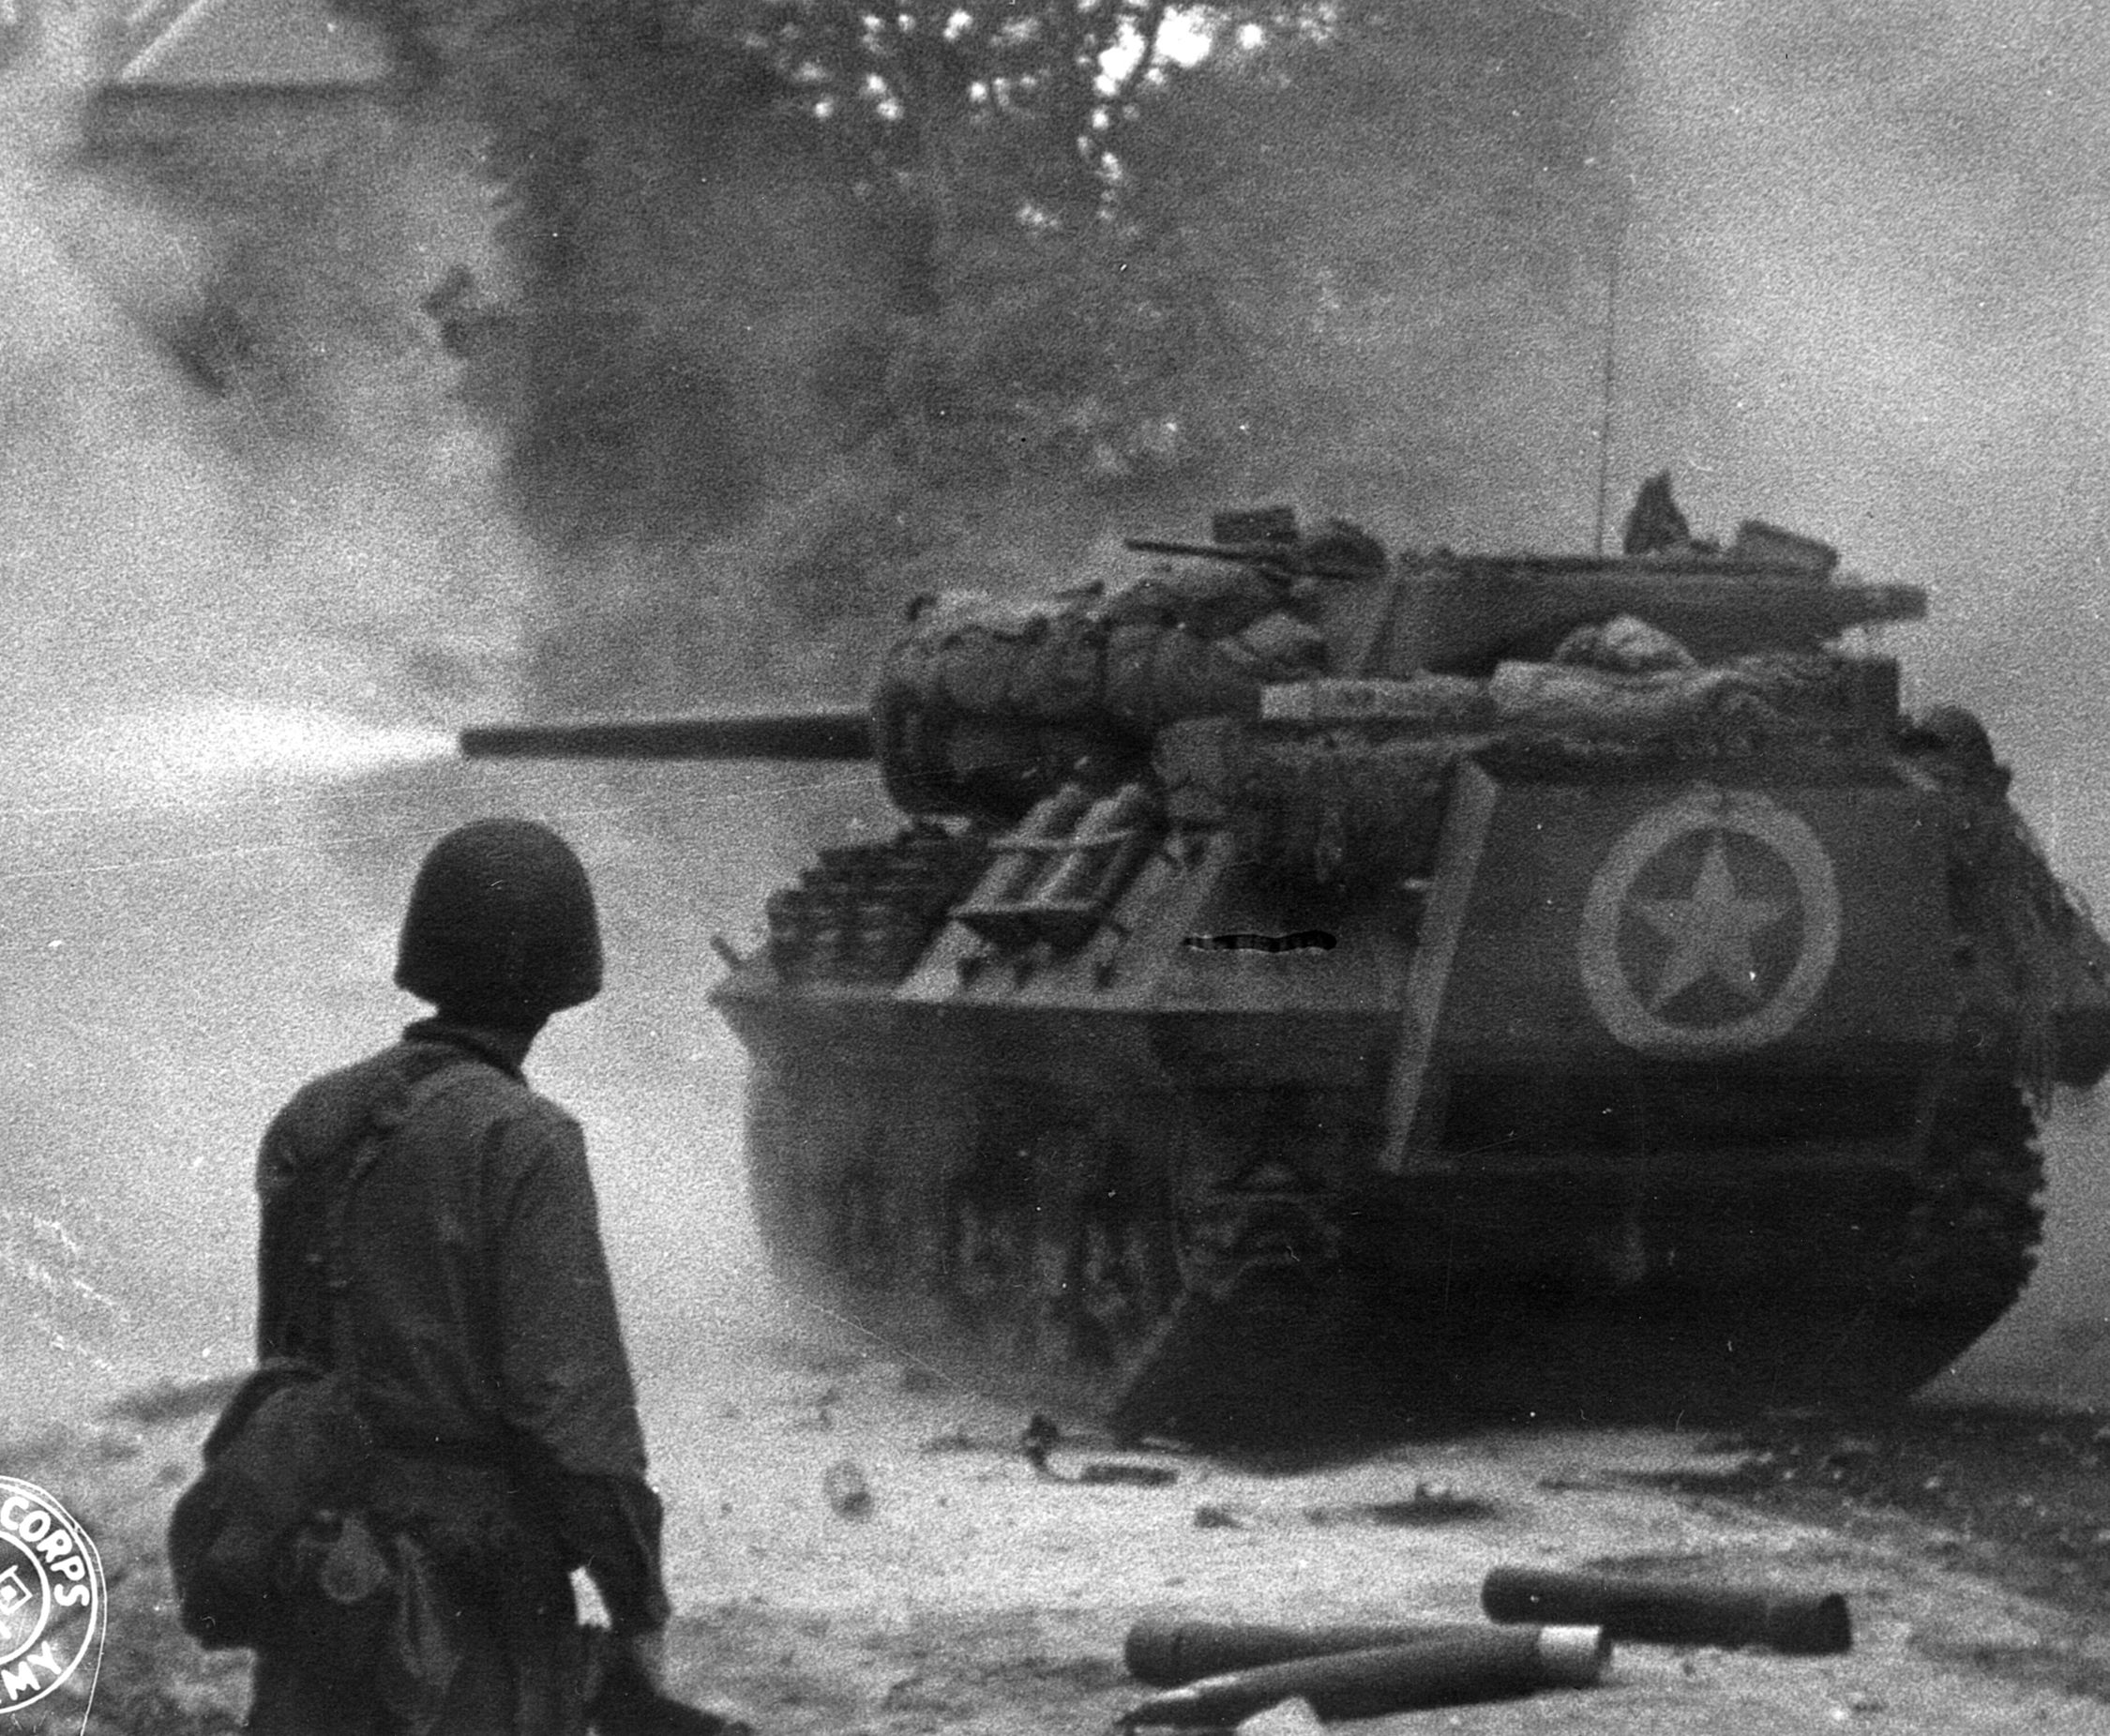 Firing away at retreating Germans in St. Lô, an American tank destroyer is watched attentively by a GI who is undoubtedly glad to have such firepower nearby.